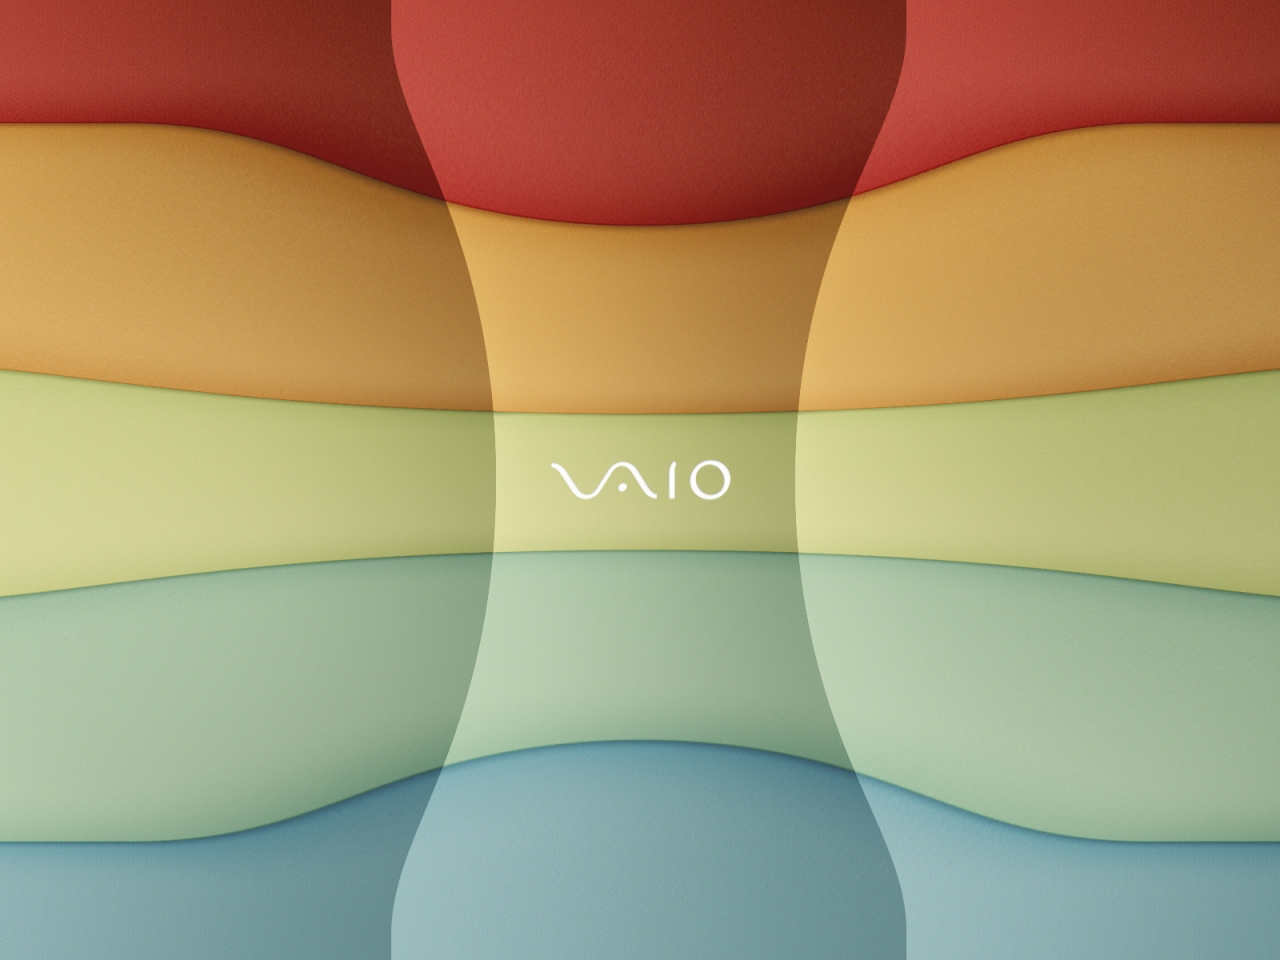 Vaio Smooth for 1280 x 960 resolution